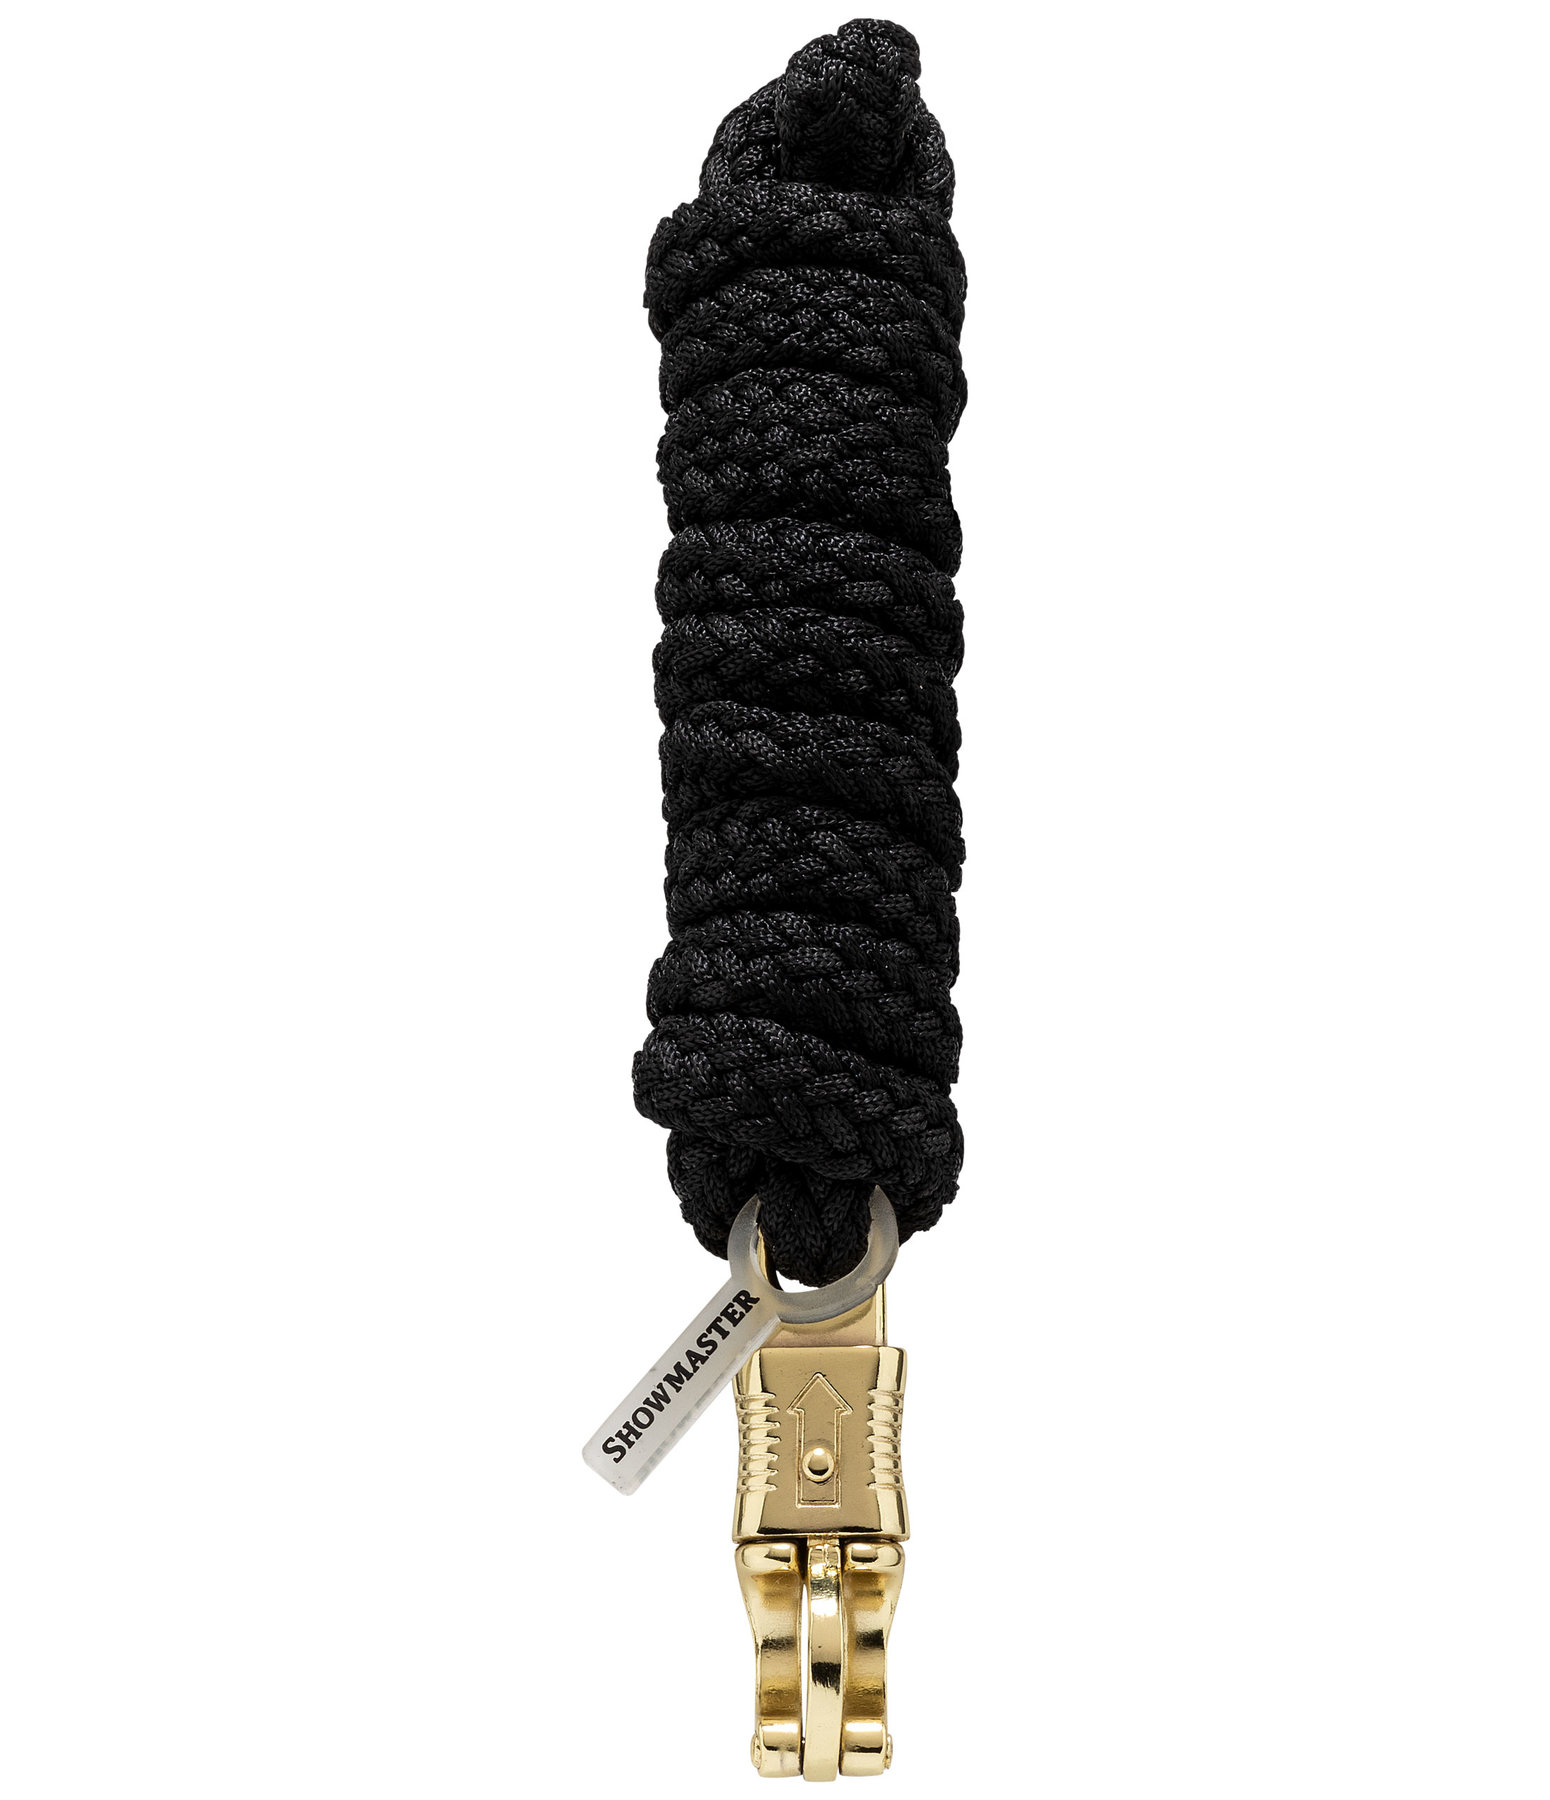 Lead Rope Durable with Panic Snap